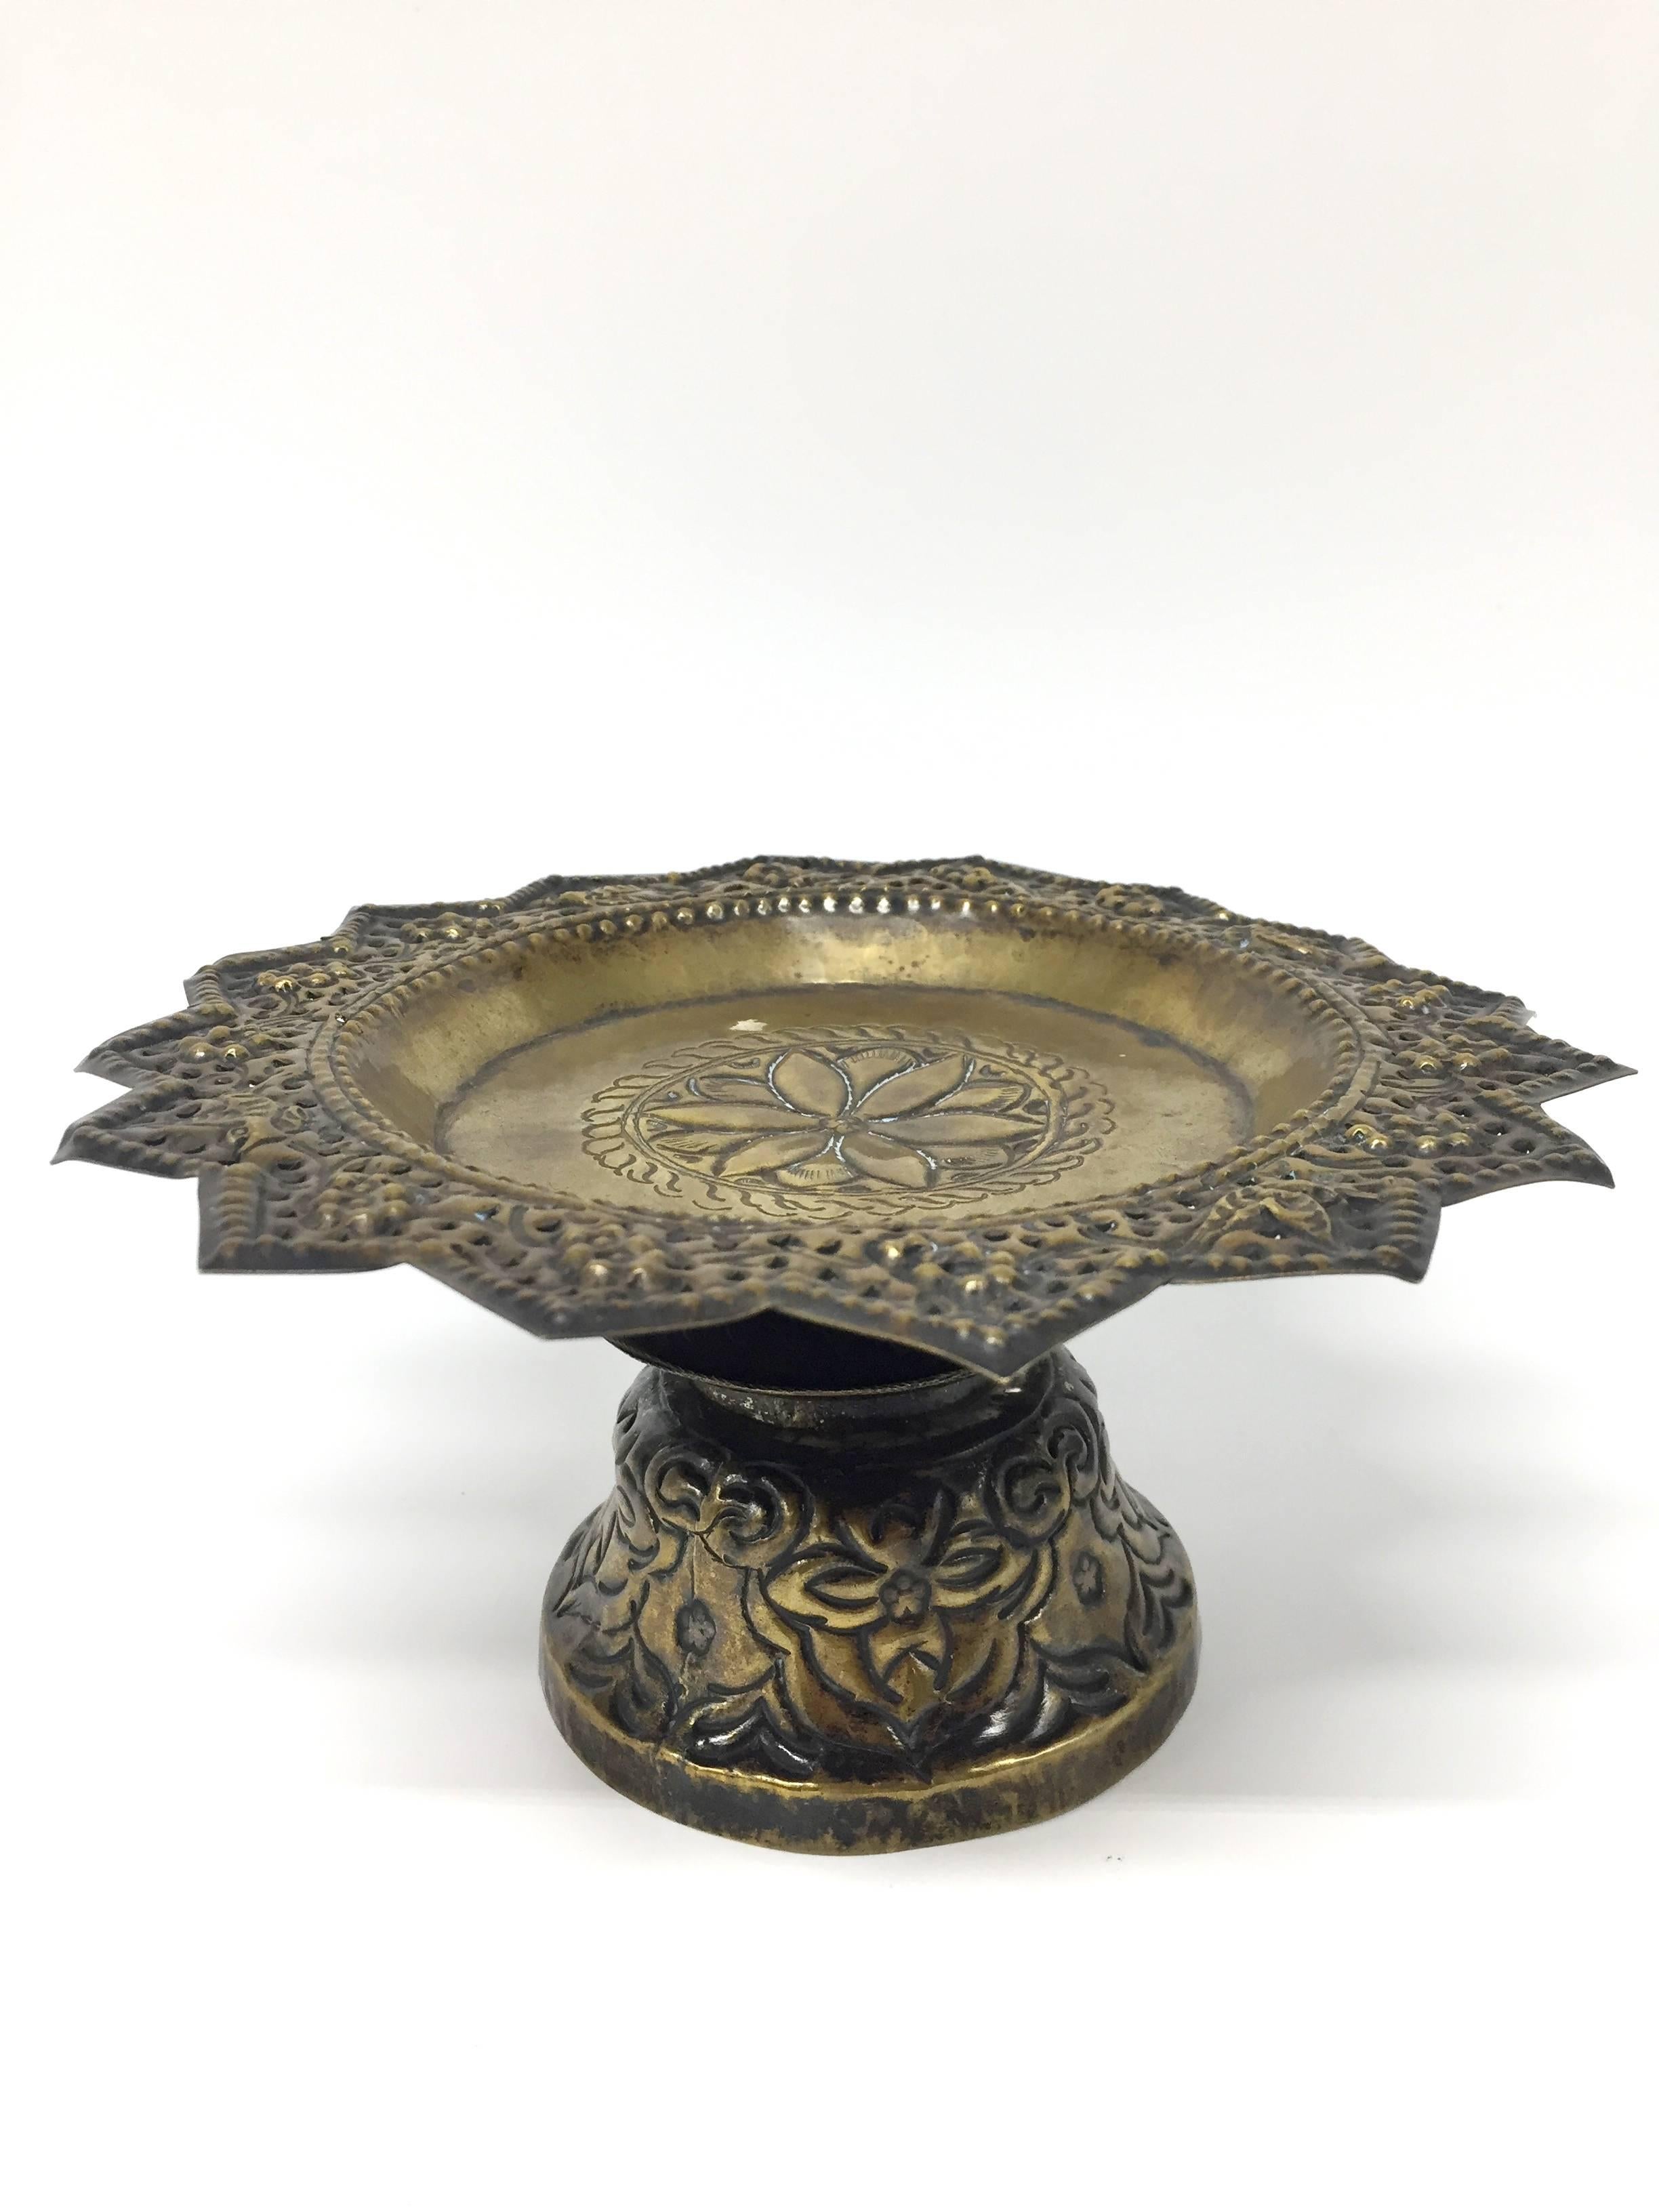 This type of dish is used on the Tibetan Altar to hold offerings such as cakes, candies and small fruits. The dish itself is very finely done with an overall lotus pattern and pierced 